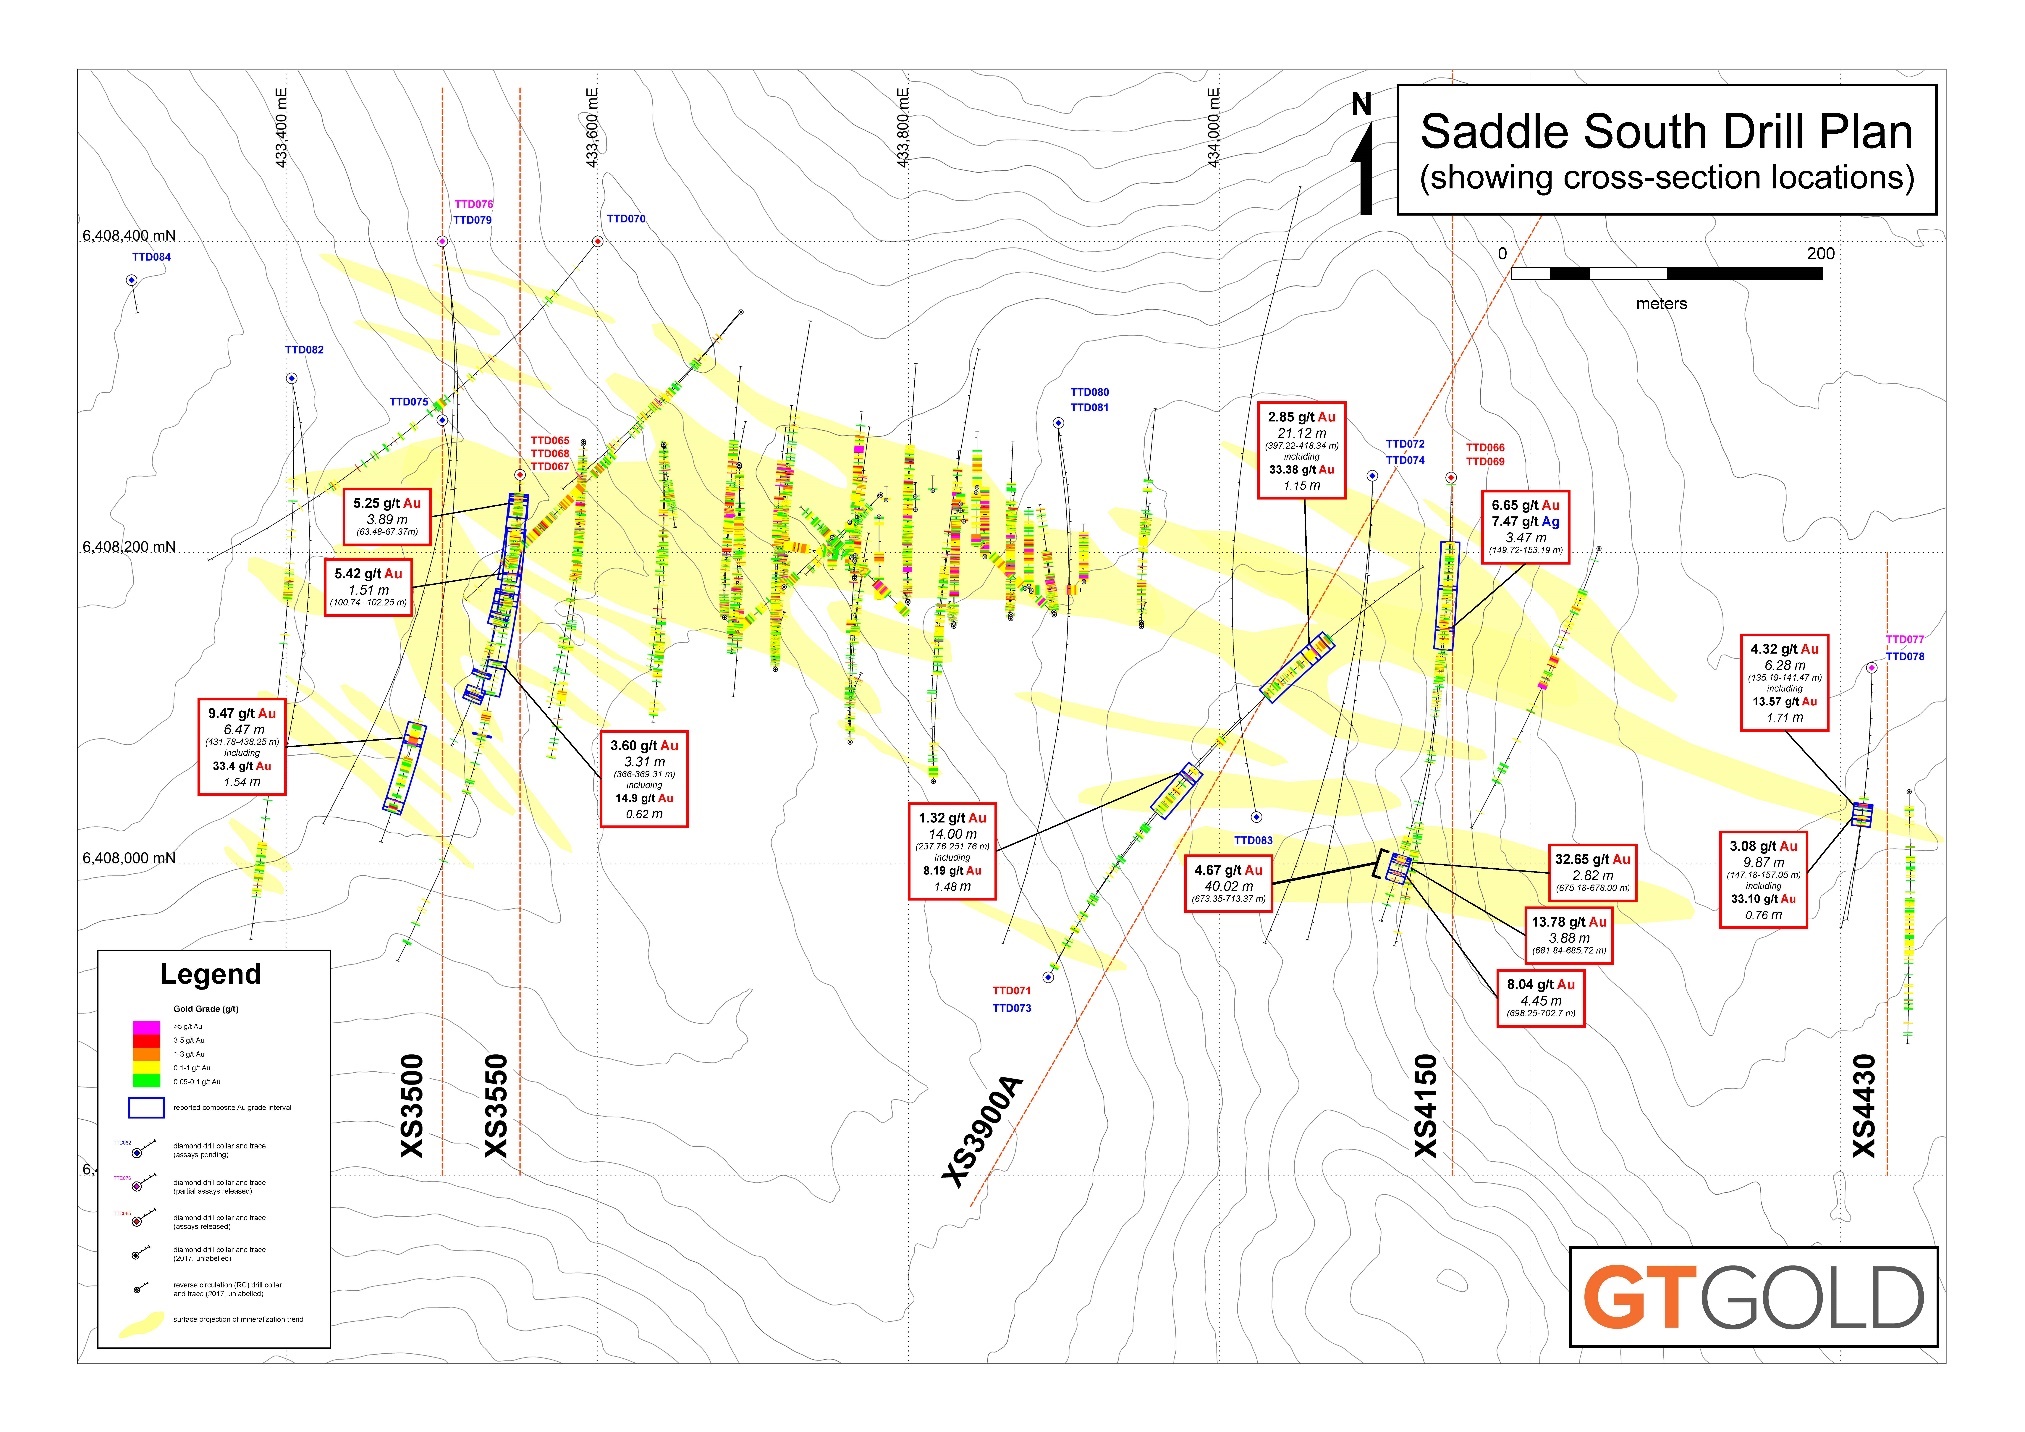 Saddle South Drilling Plan View, August 8, 2018 